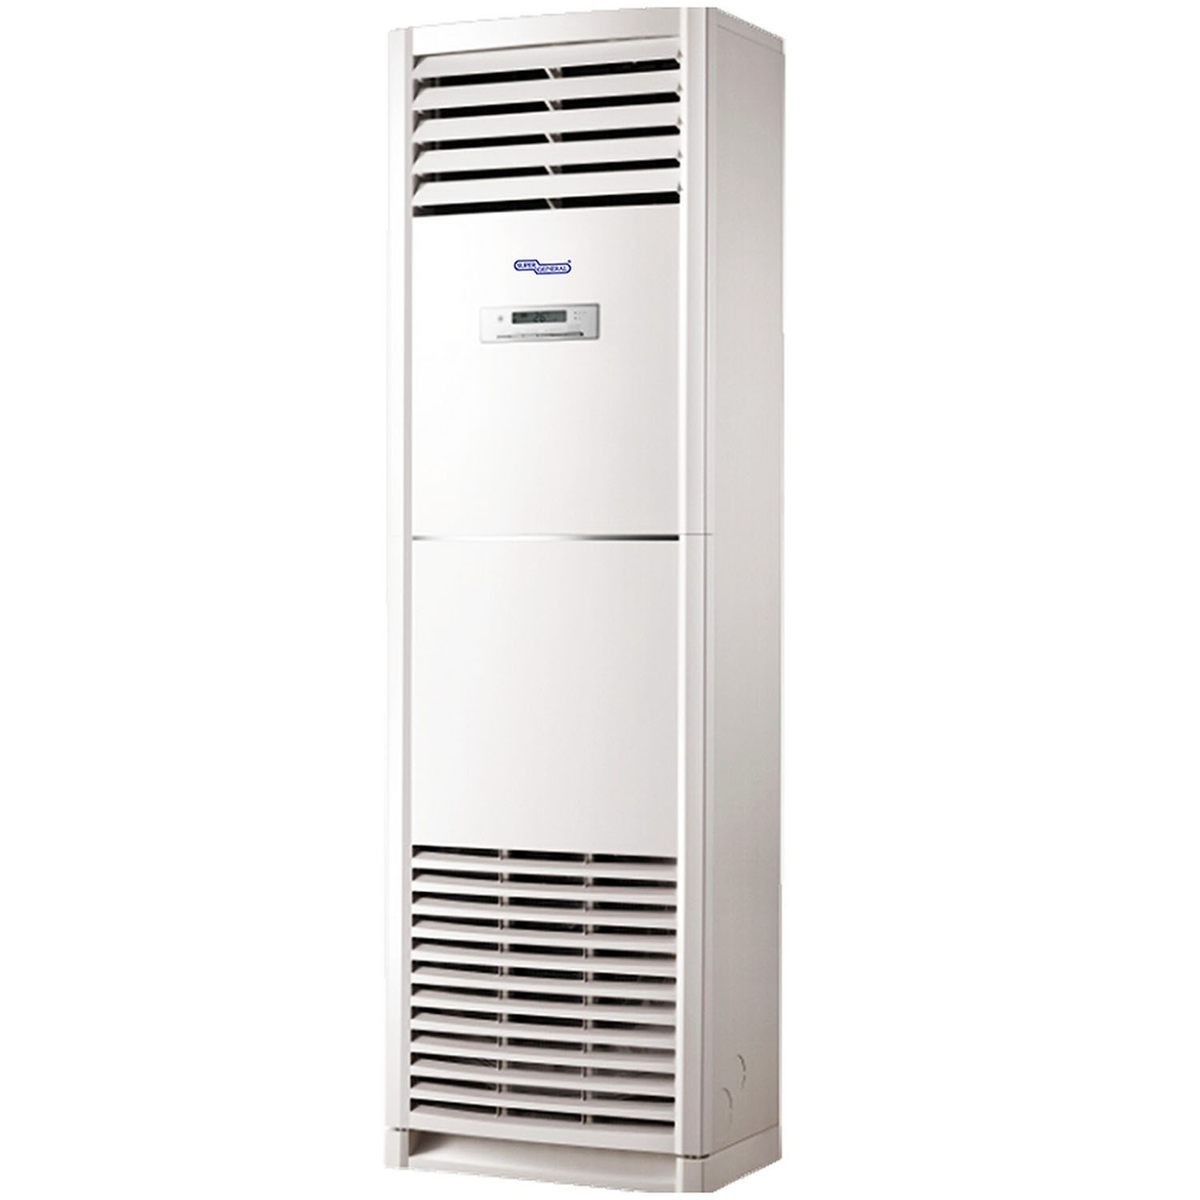 Super General Floor Standing Air Conditioner SGFS48HE 4Ton